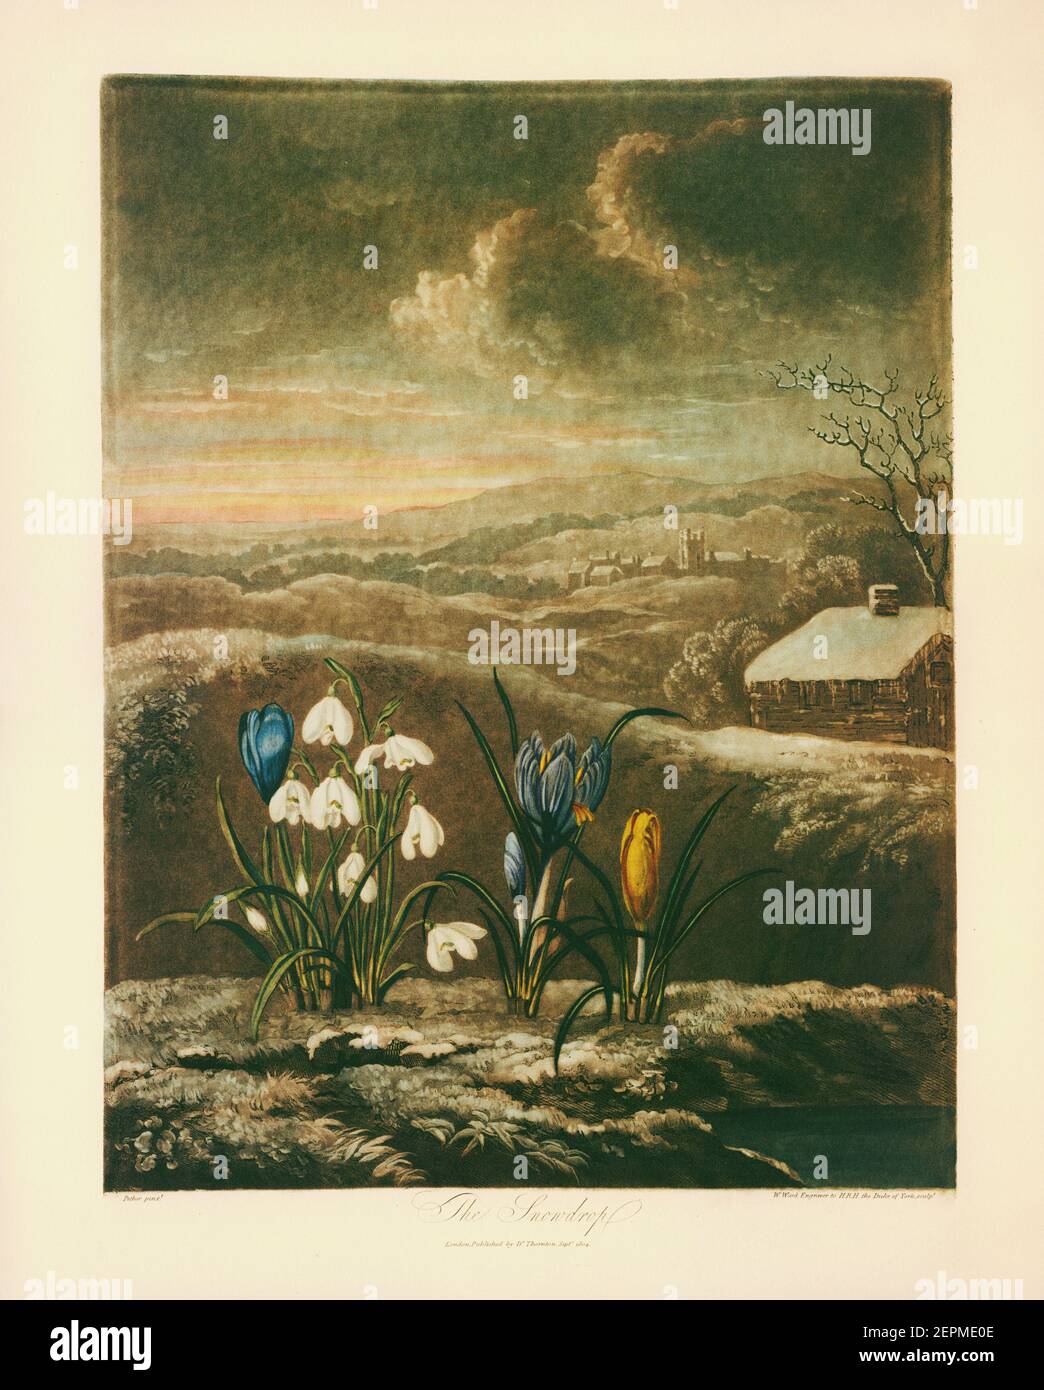 The Snowdrop. Galantus Nivalis L., Crocus Nudiflorus Sm. Published by Robert John Thornton (1768-1837), an English physician and botanical writer, in Stock Photo